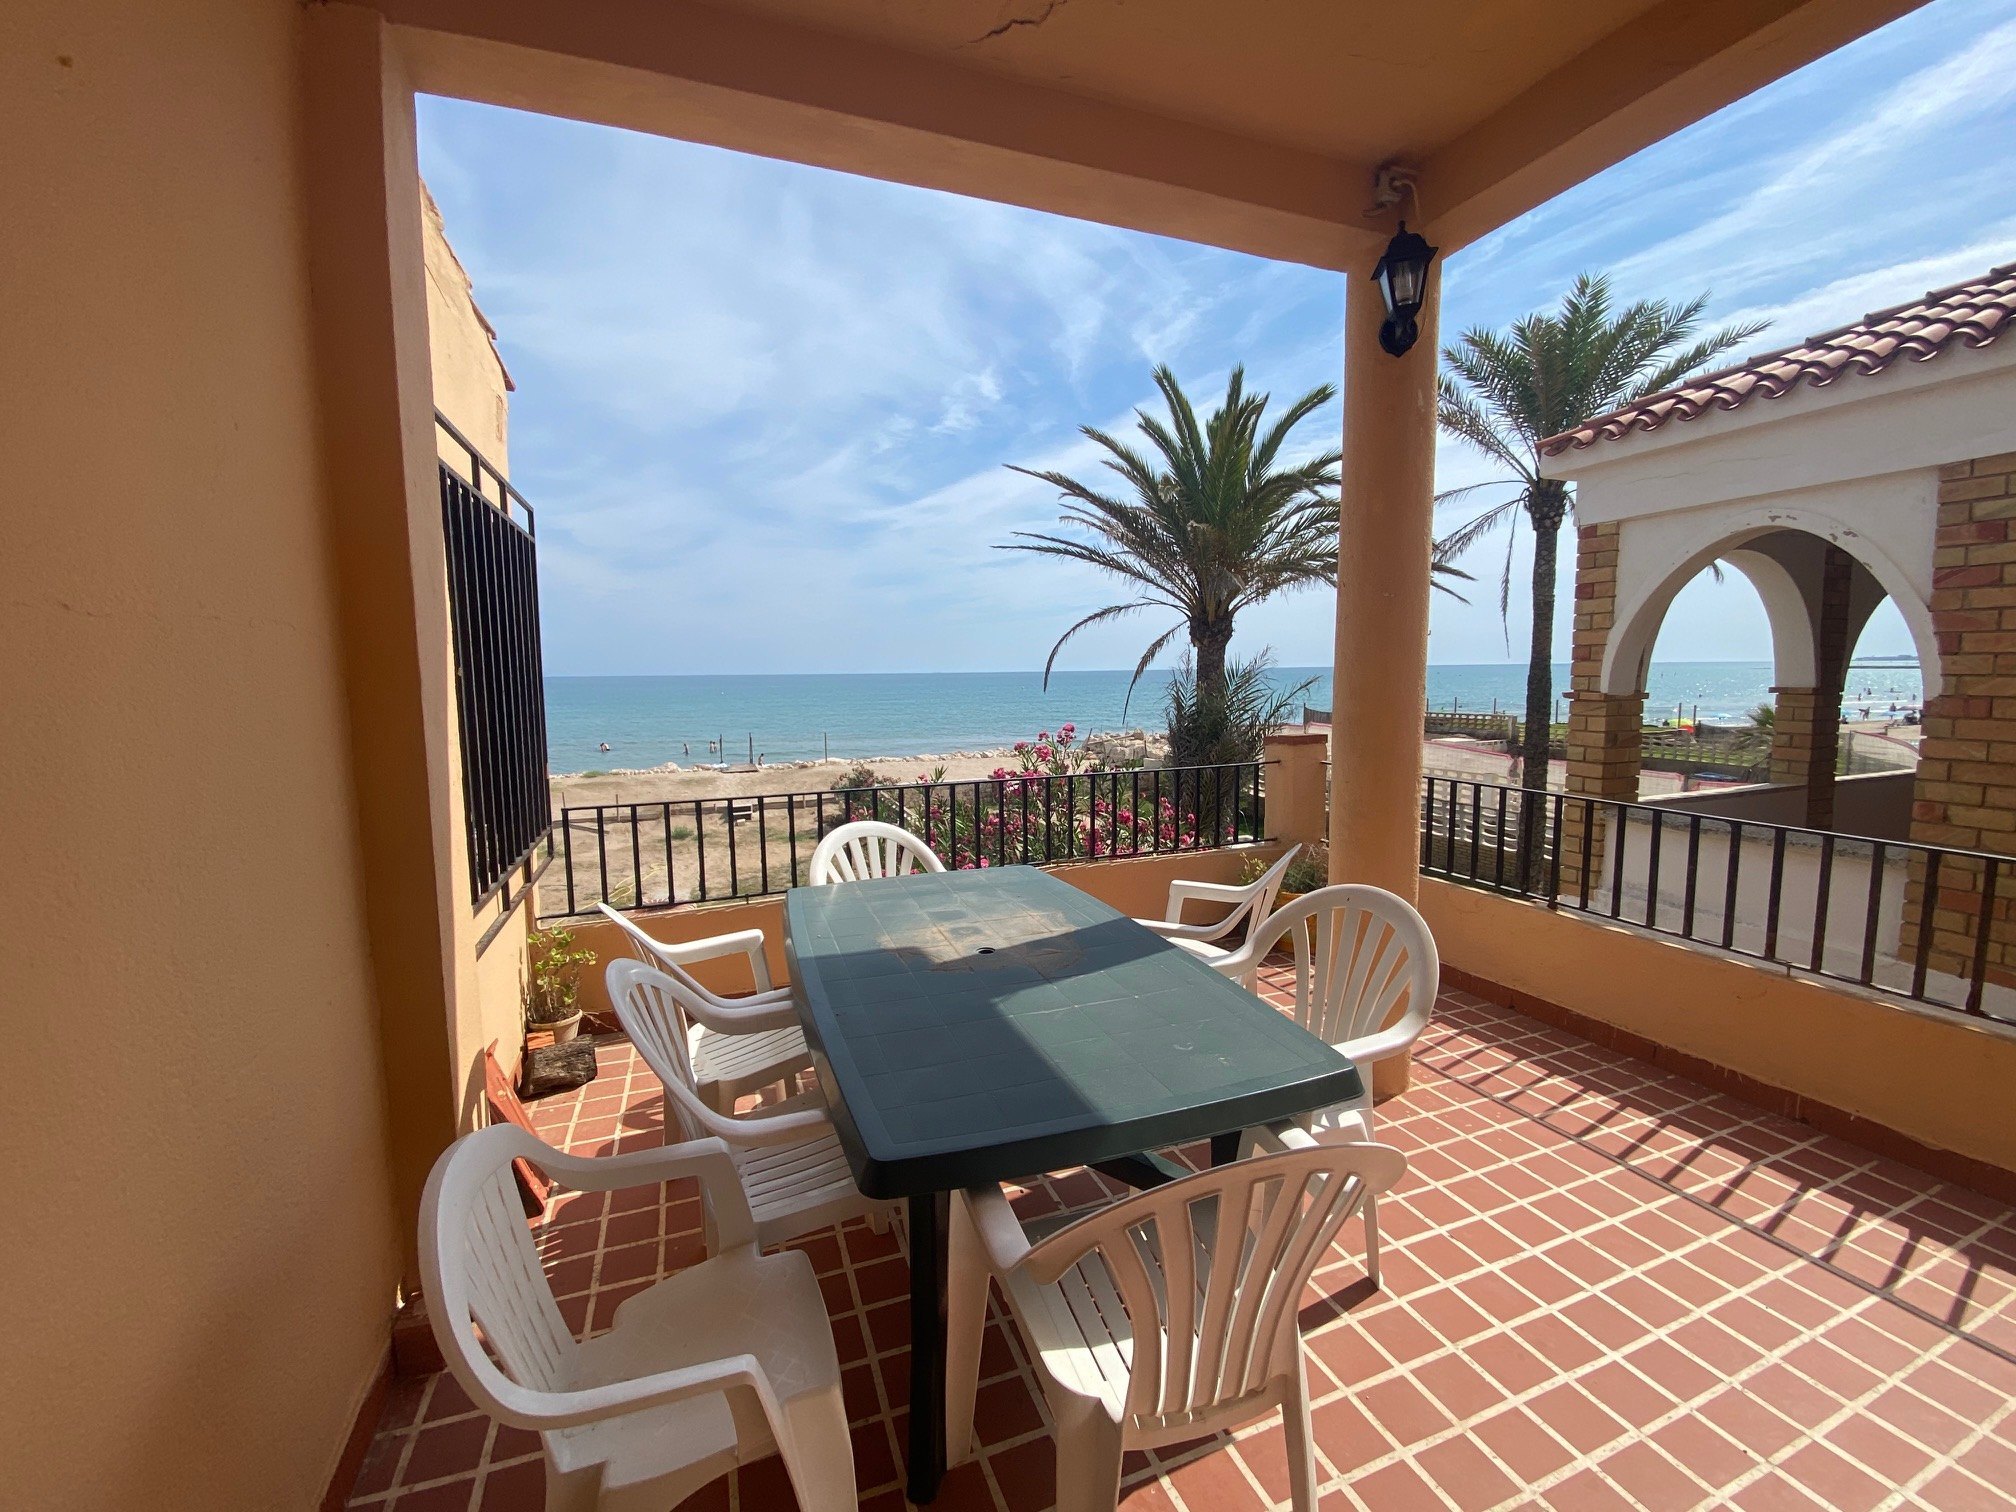 Detached villa in the first line of the beach with sea views